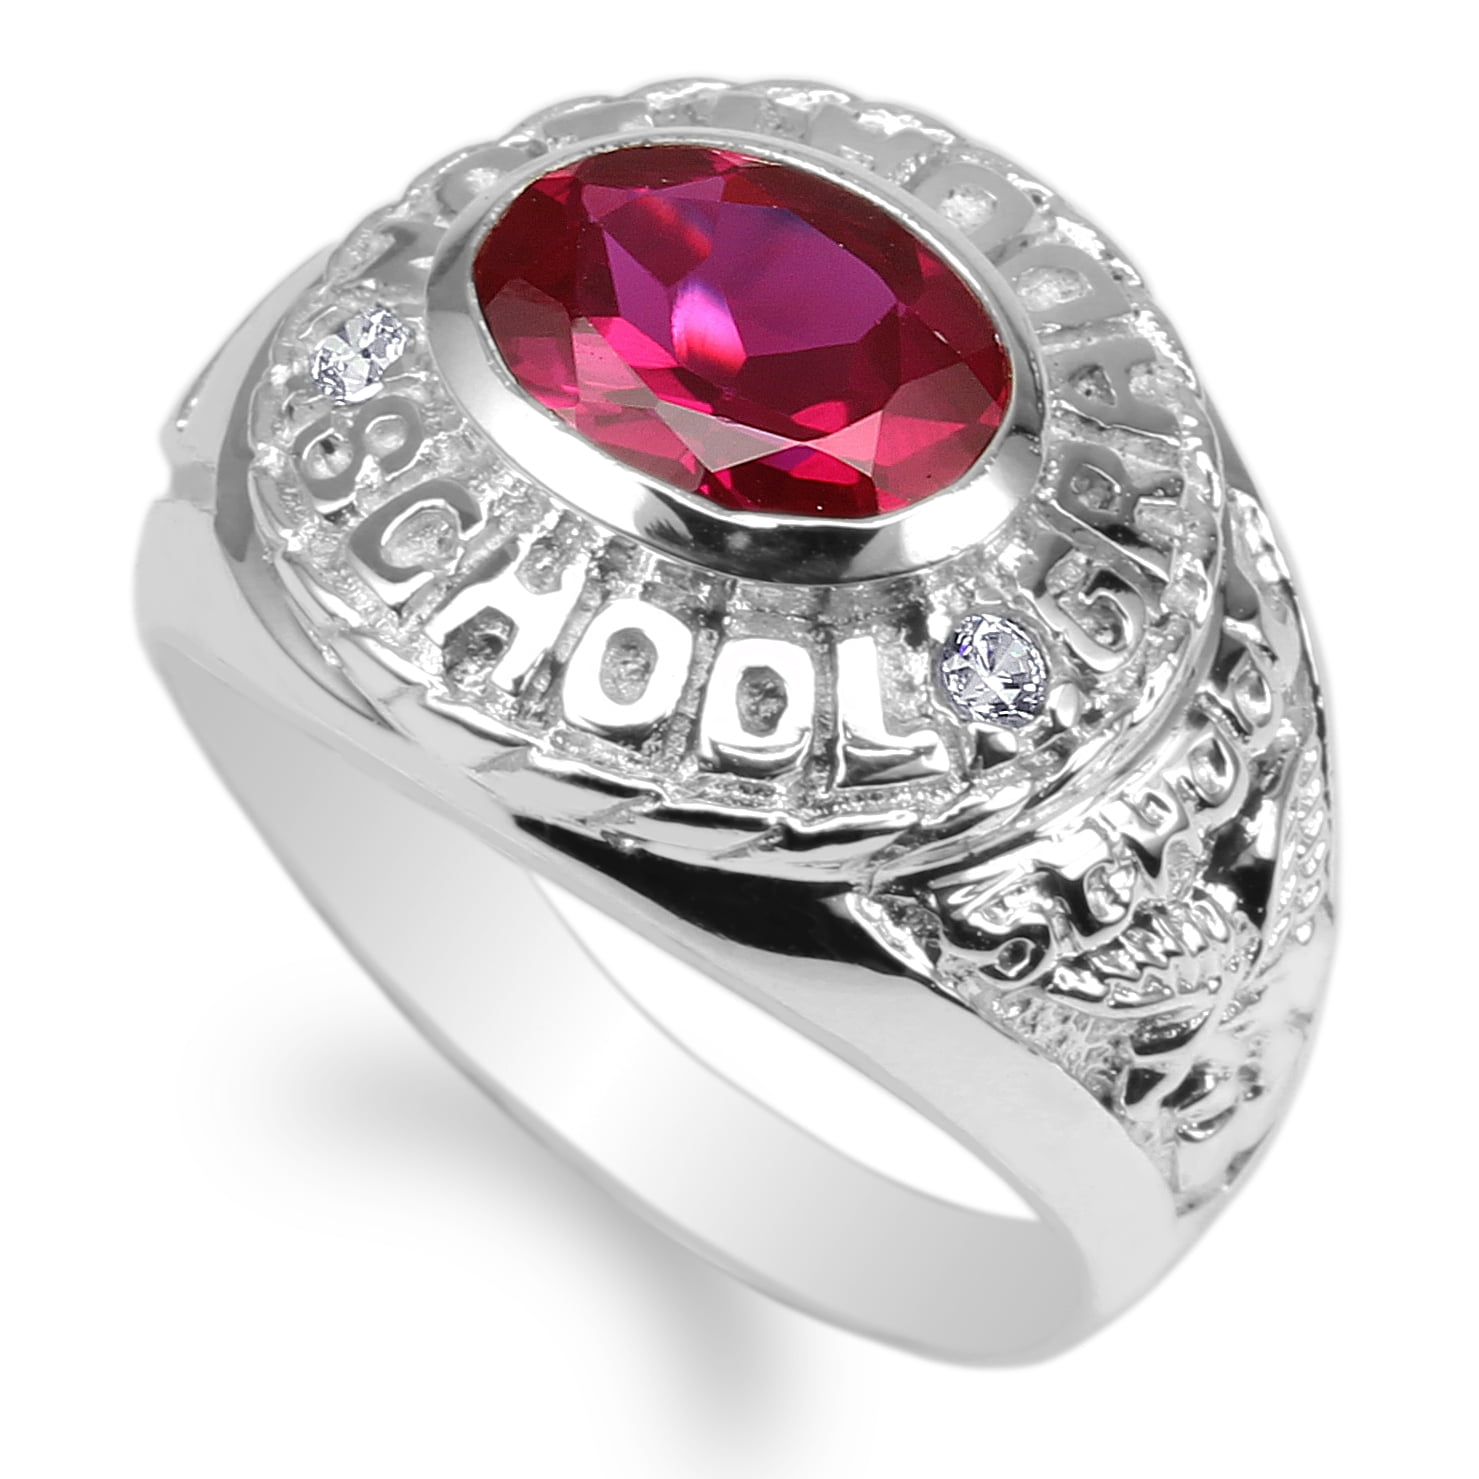 CLASSY 1 CT RUBY 925 STERLING SILVER RING SIZE 5-10 